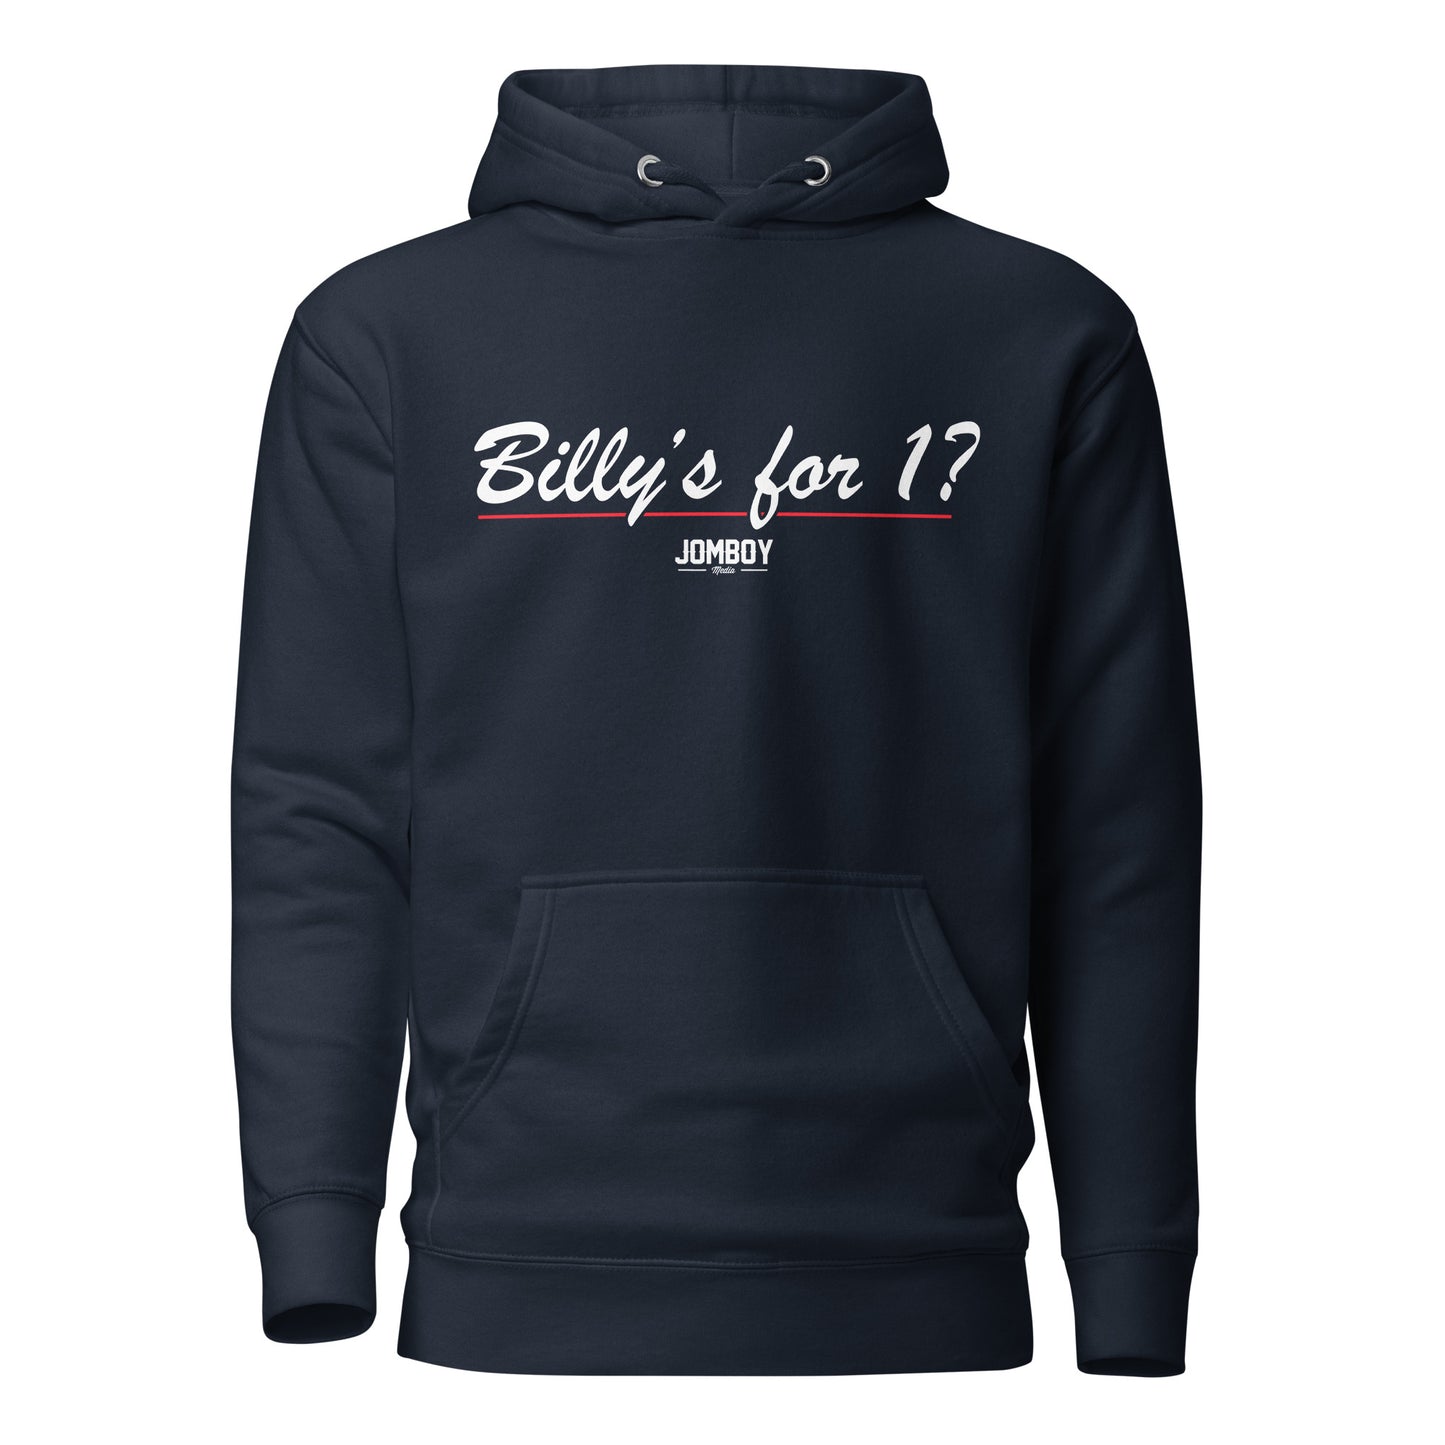 Billy's for 1? | Premium Cotton Hoodie